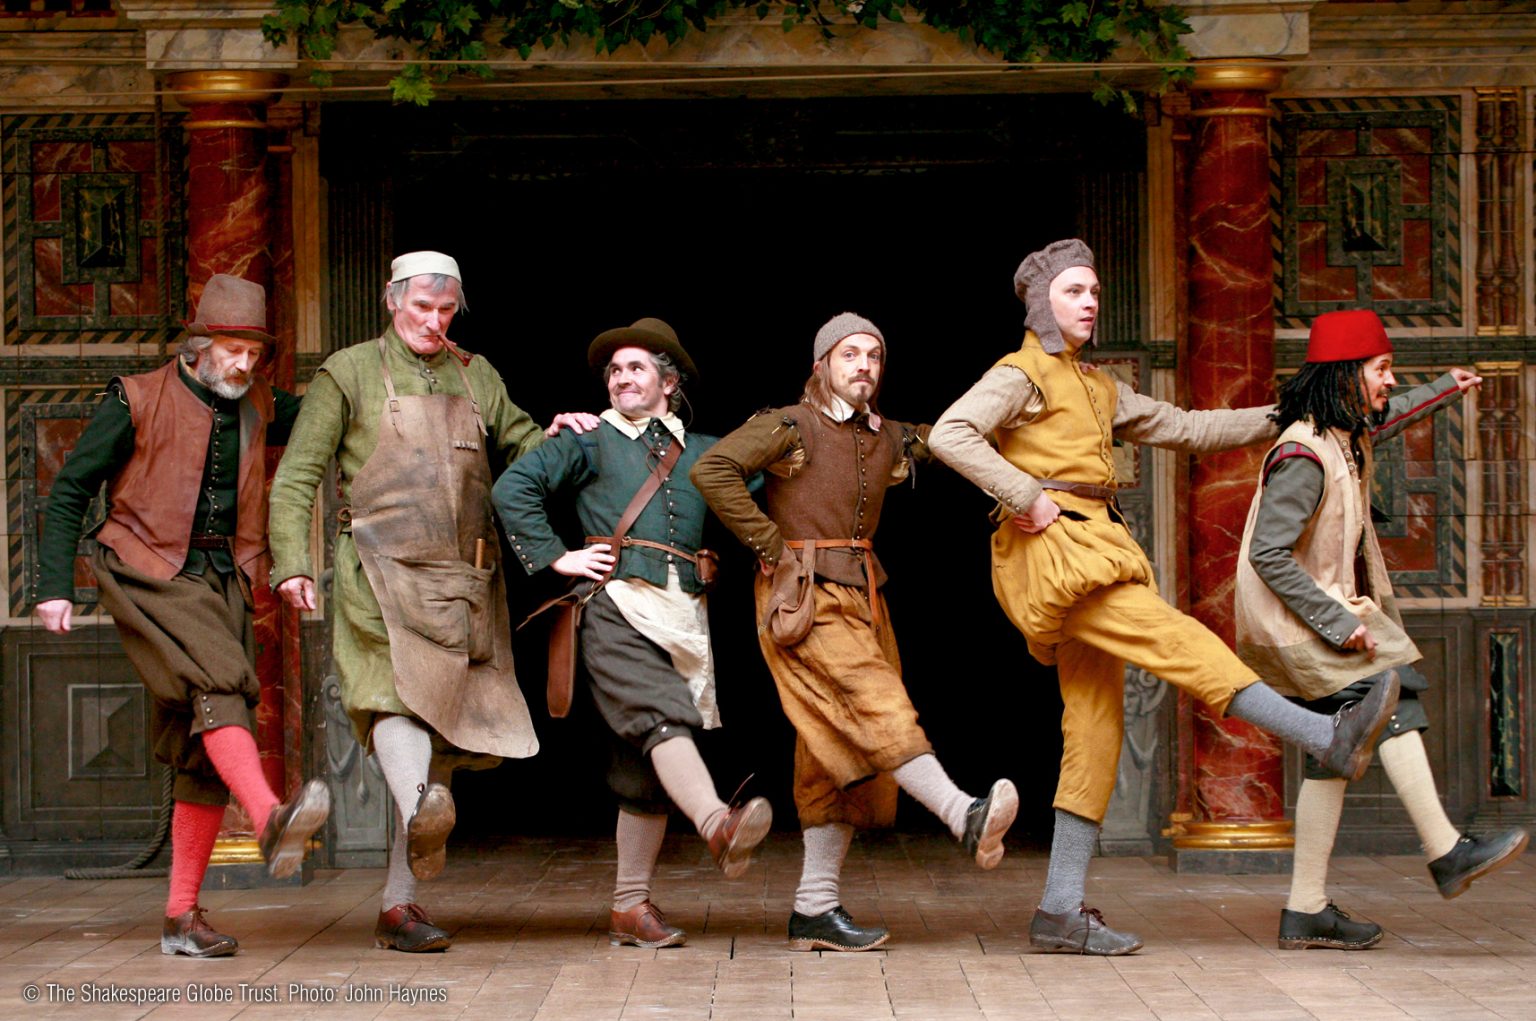 shakespeare acting influences clf shakespeares shakespearesglobe costumes troupe chamberlain lord